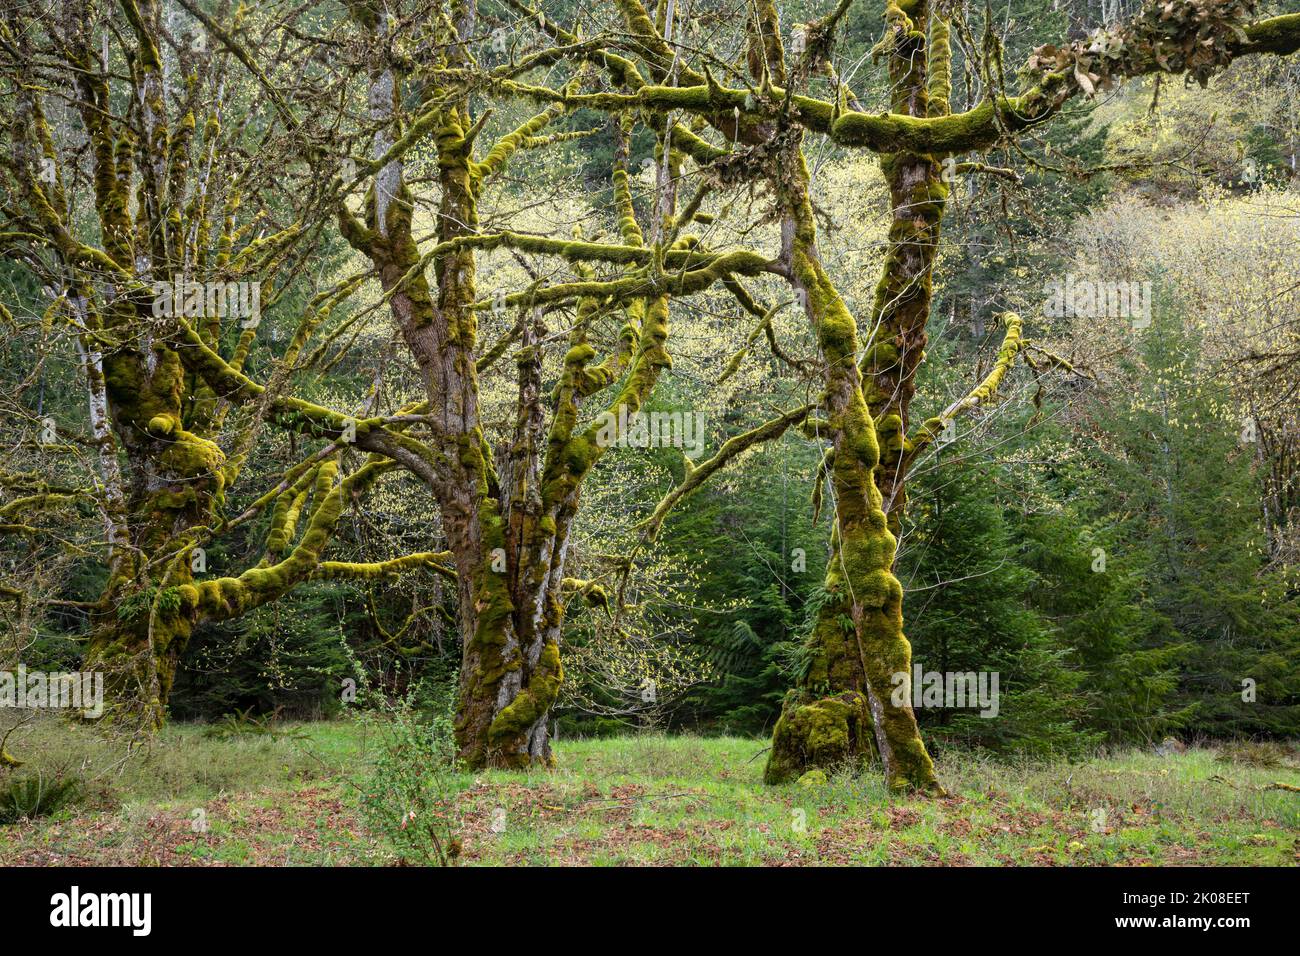 WA21979-00...WASHINGTON - Moss covered Big Leaf maple trees in the Elwha River Valley of Olympic National Park. Stock Photo